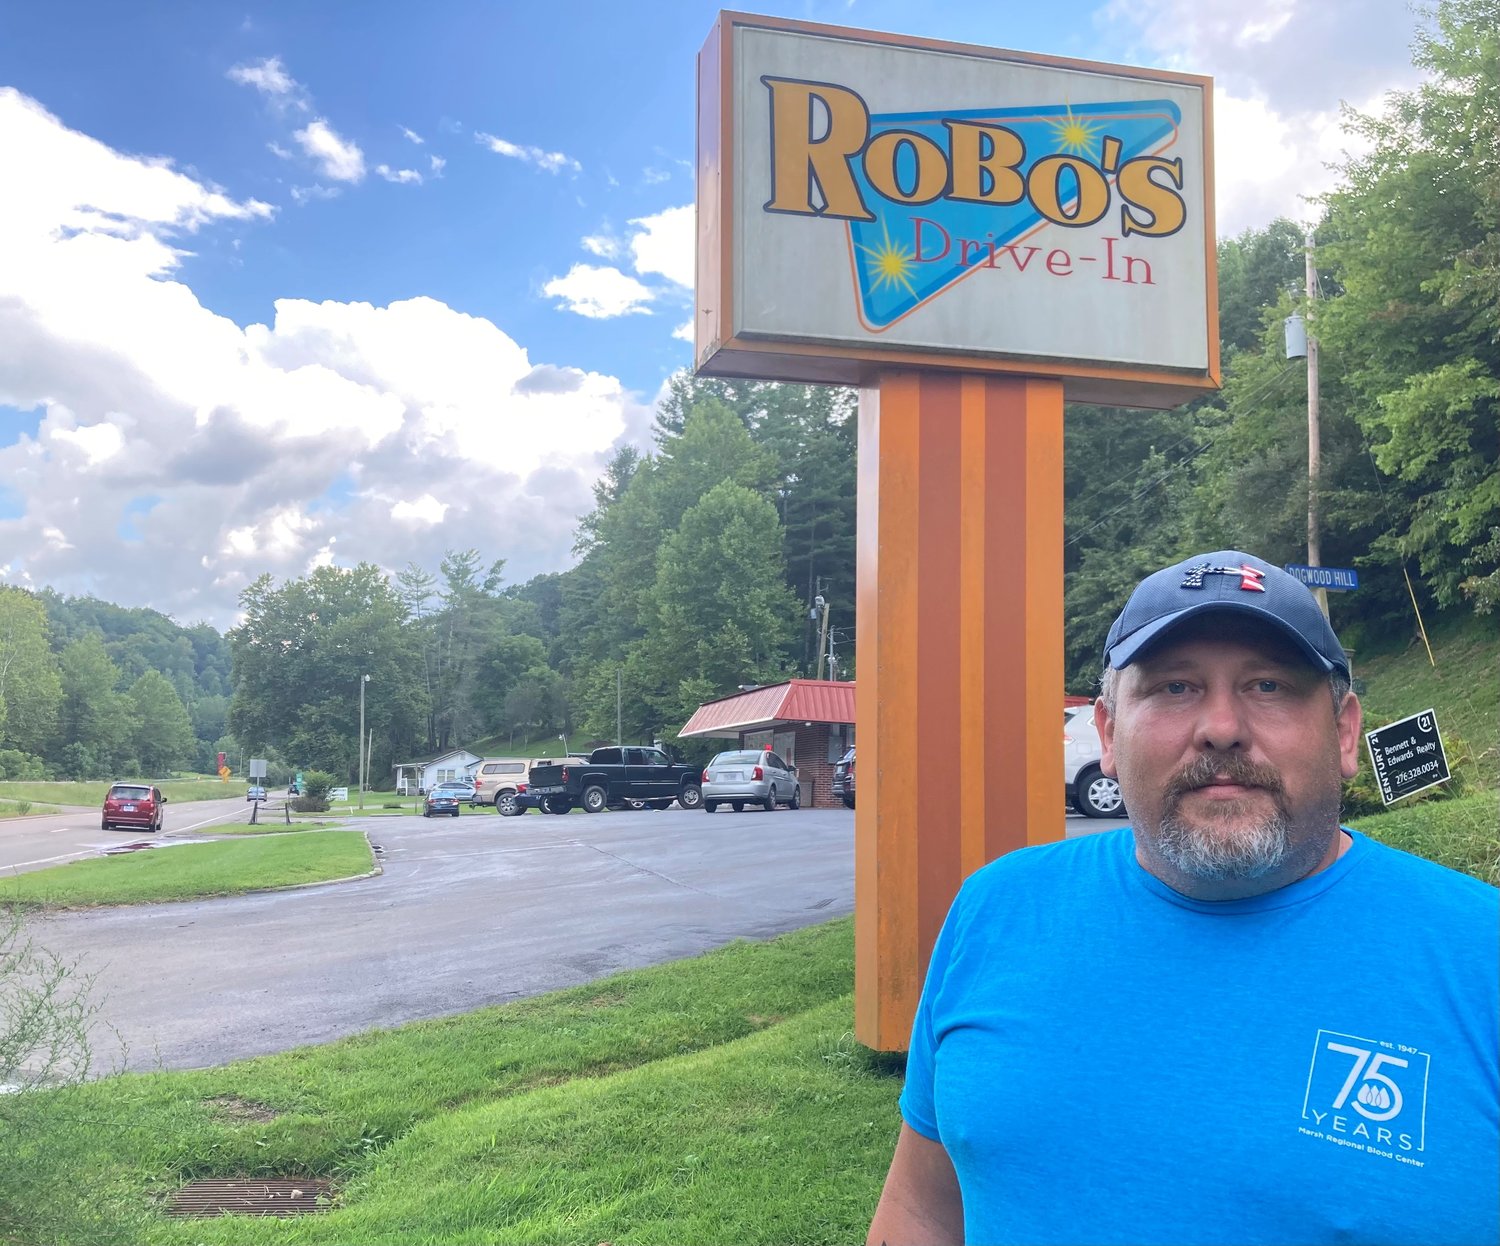 Eddie Johnson poses for a photo beneath the Robo's Drive-In restaurant sign in Pound, Va.